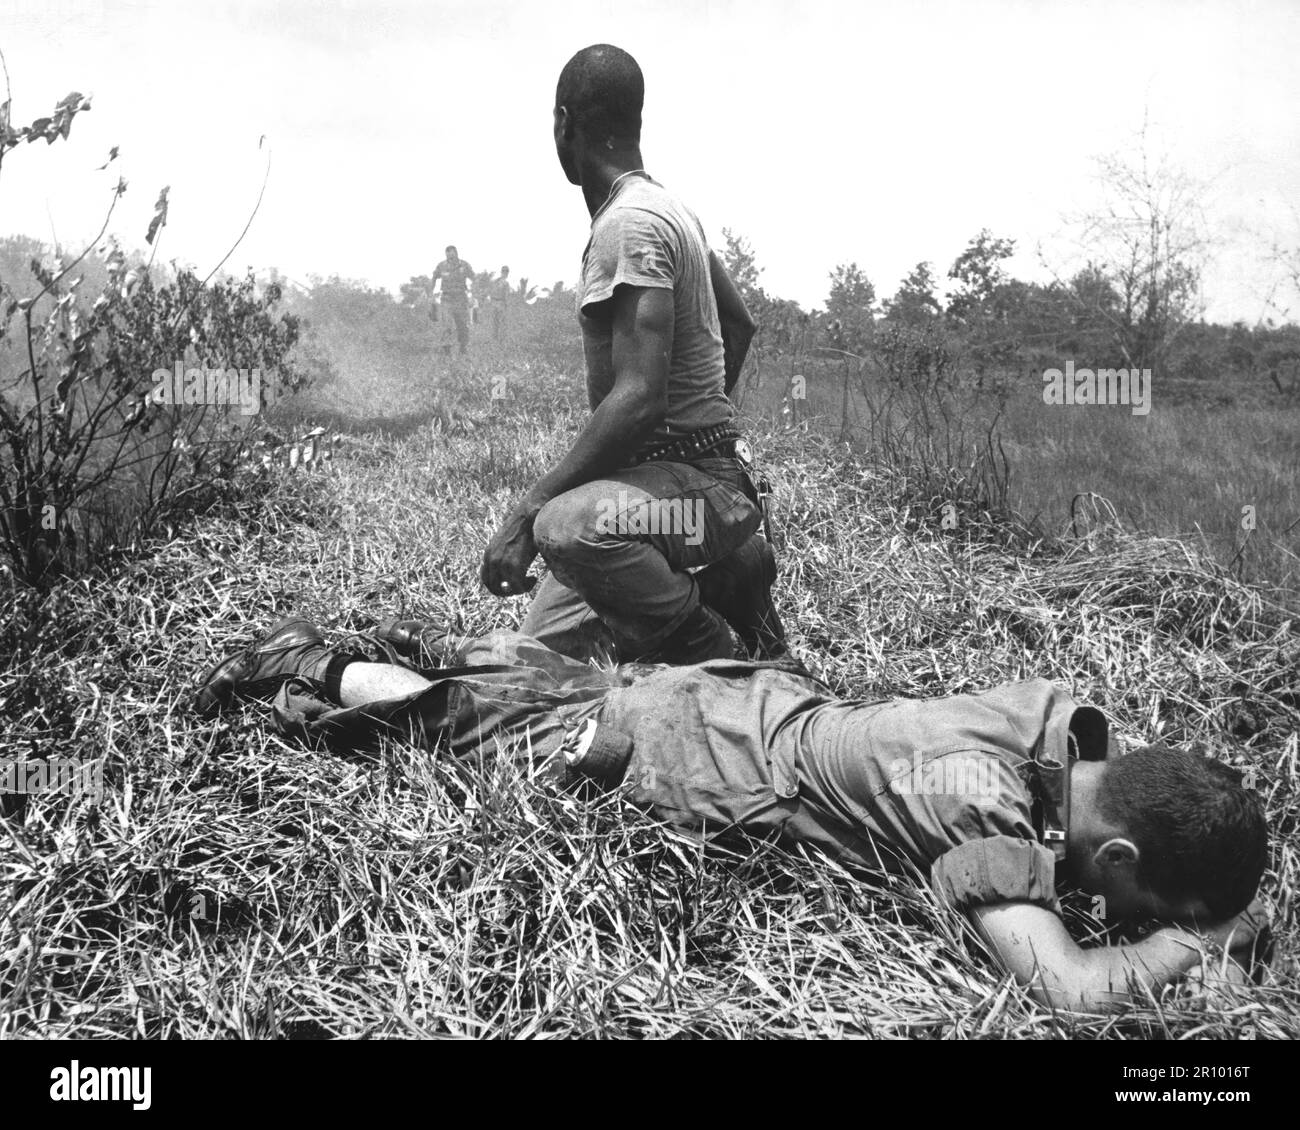 A young American lieutenant, his leg burned by an exploding Viet Cong white phosphorus booby trap, awaits a Medevac helicopter while treated by a medic.  Circa 1966. Stock Photo